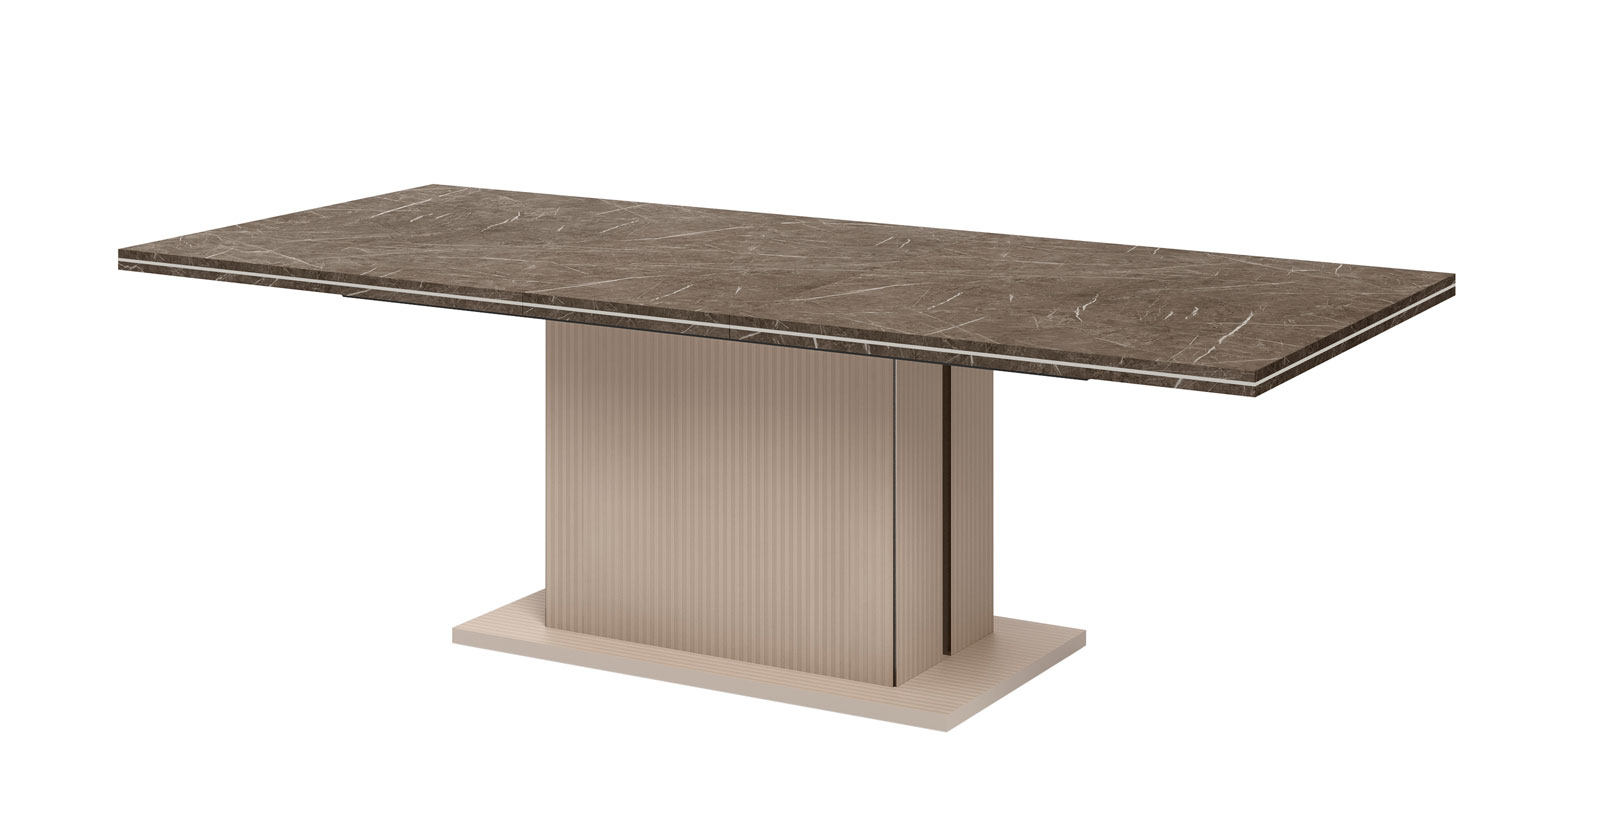 Brands Camel Gold Collection, Italy Fidia- Aris Dining table